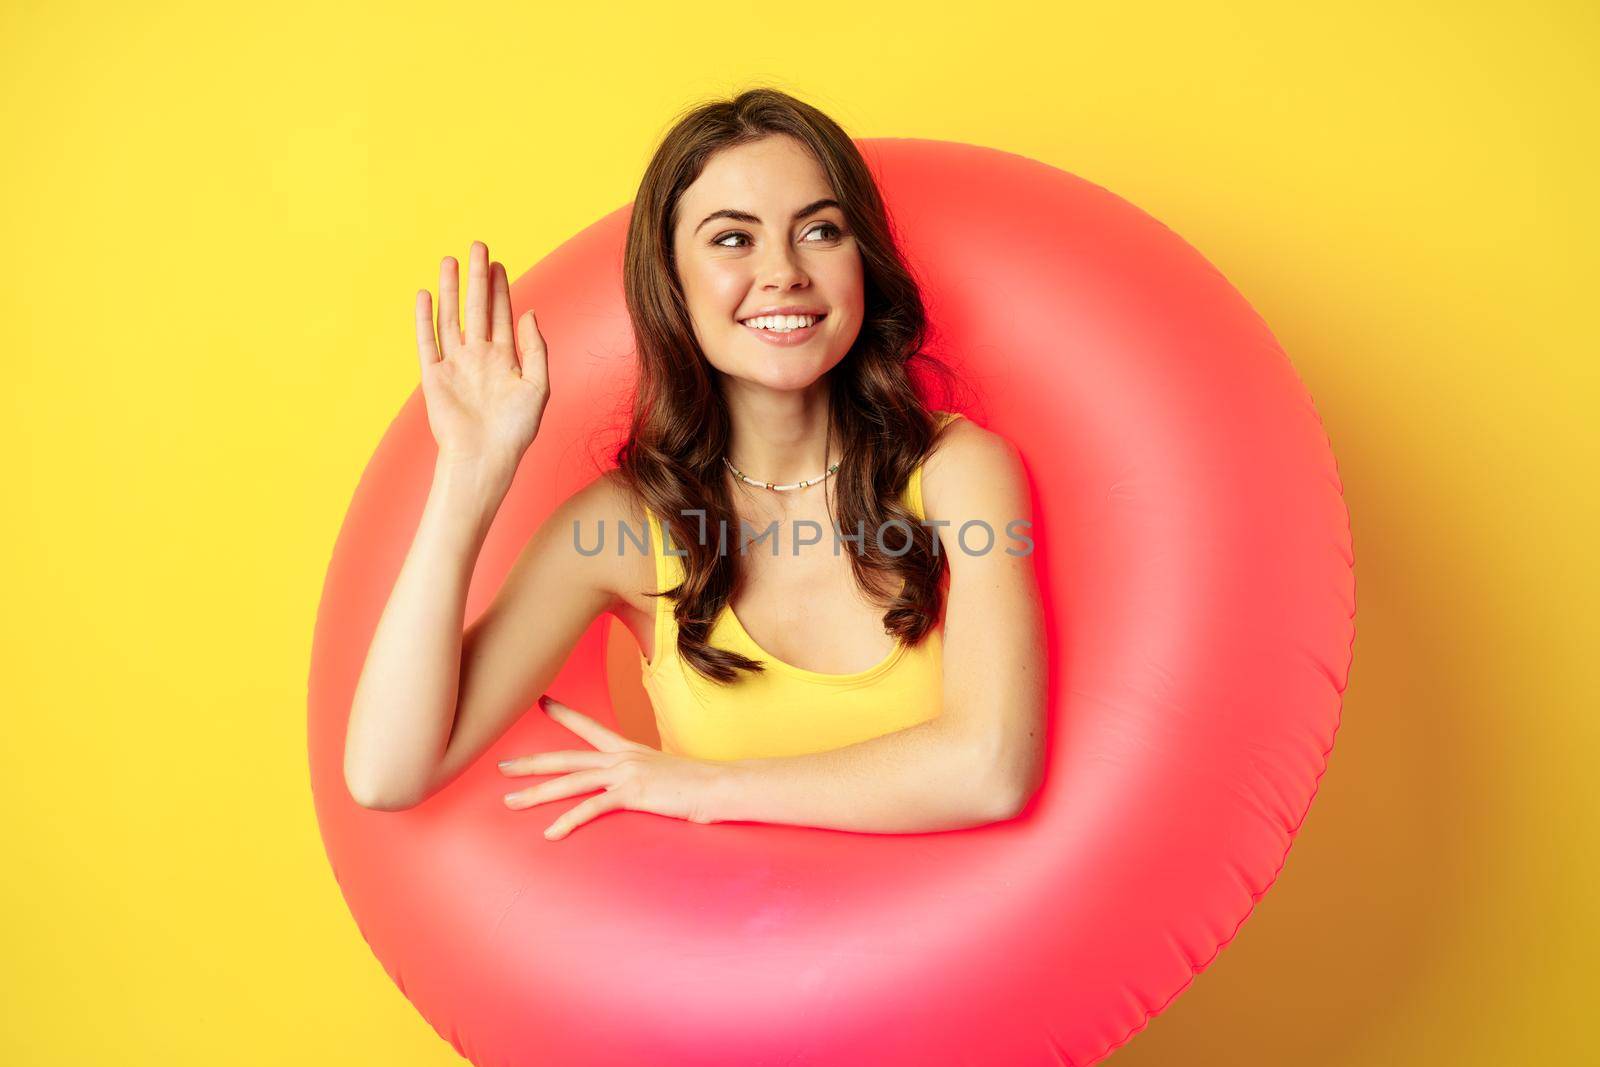 Happy young woman wearing pink swimming ring, waving hand and saying hi, enjoying vacation, summer beach holiday, standing over yellow background.